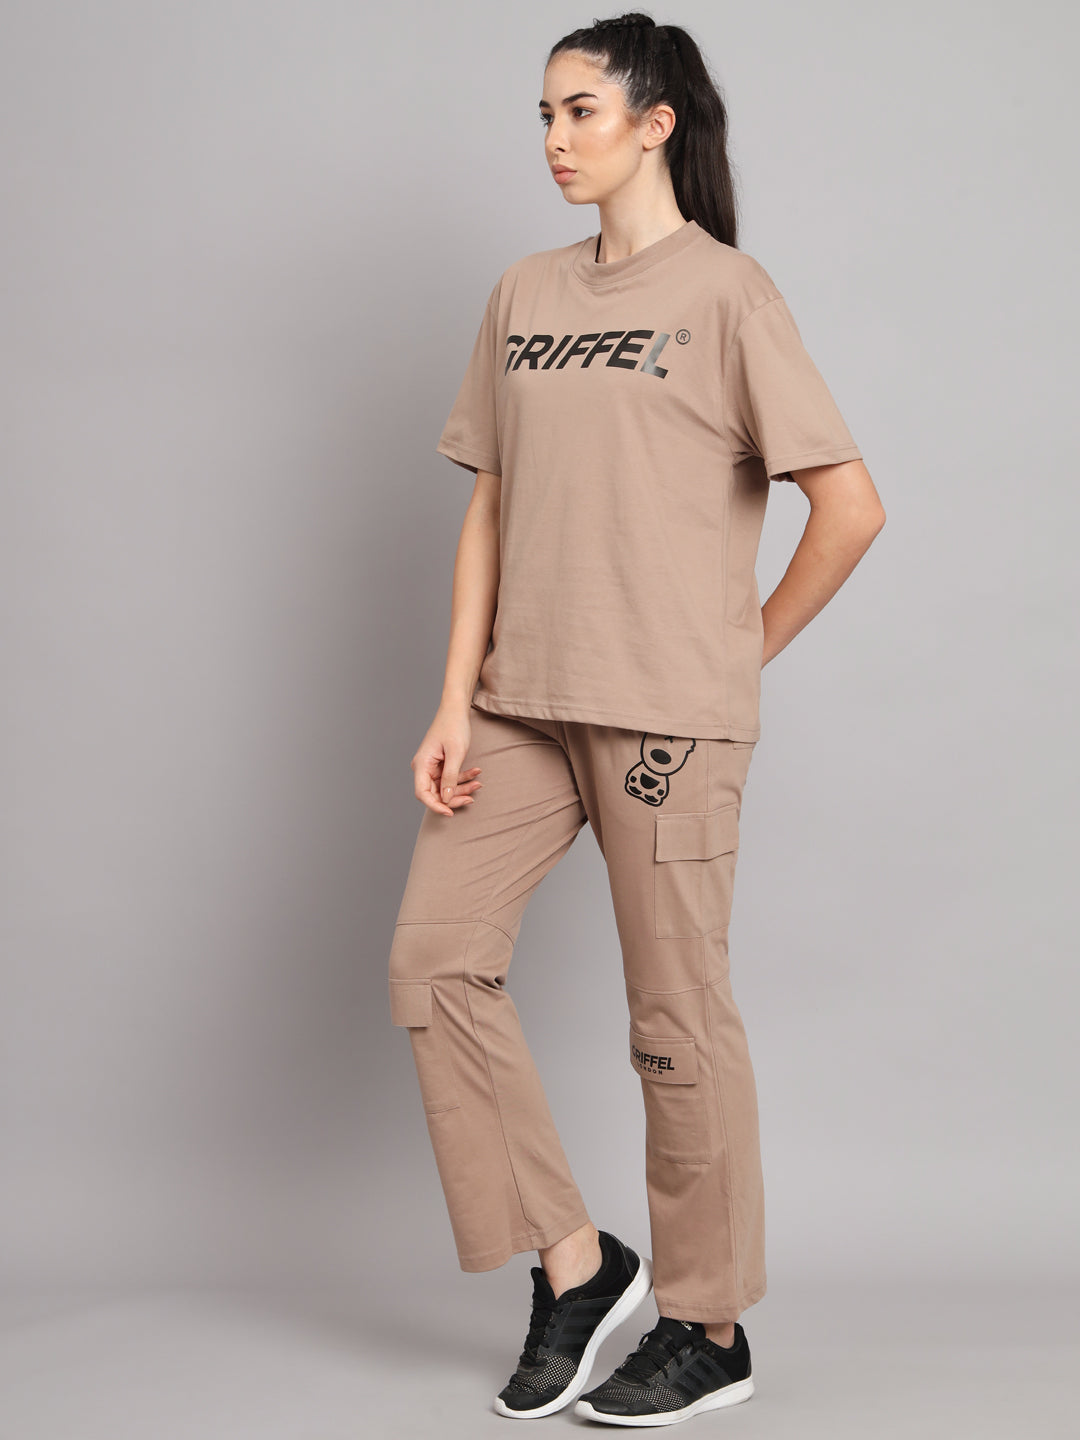 GRIFFEL Women Printed Loose fit Camel T-shirt and Bell Bottom Trackpant Set - griffel